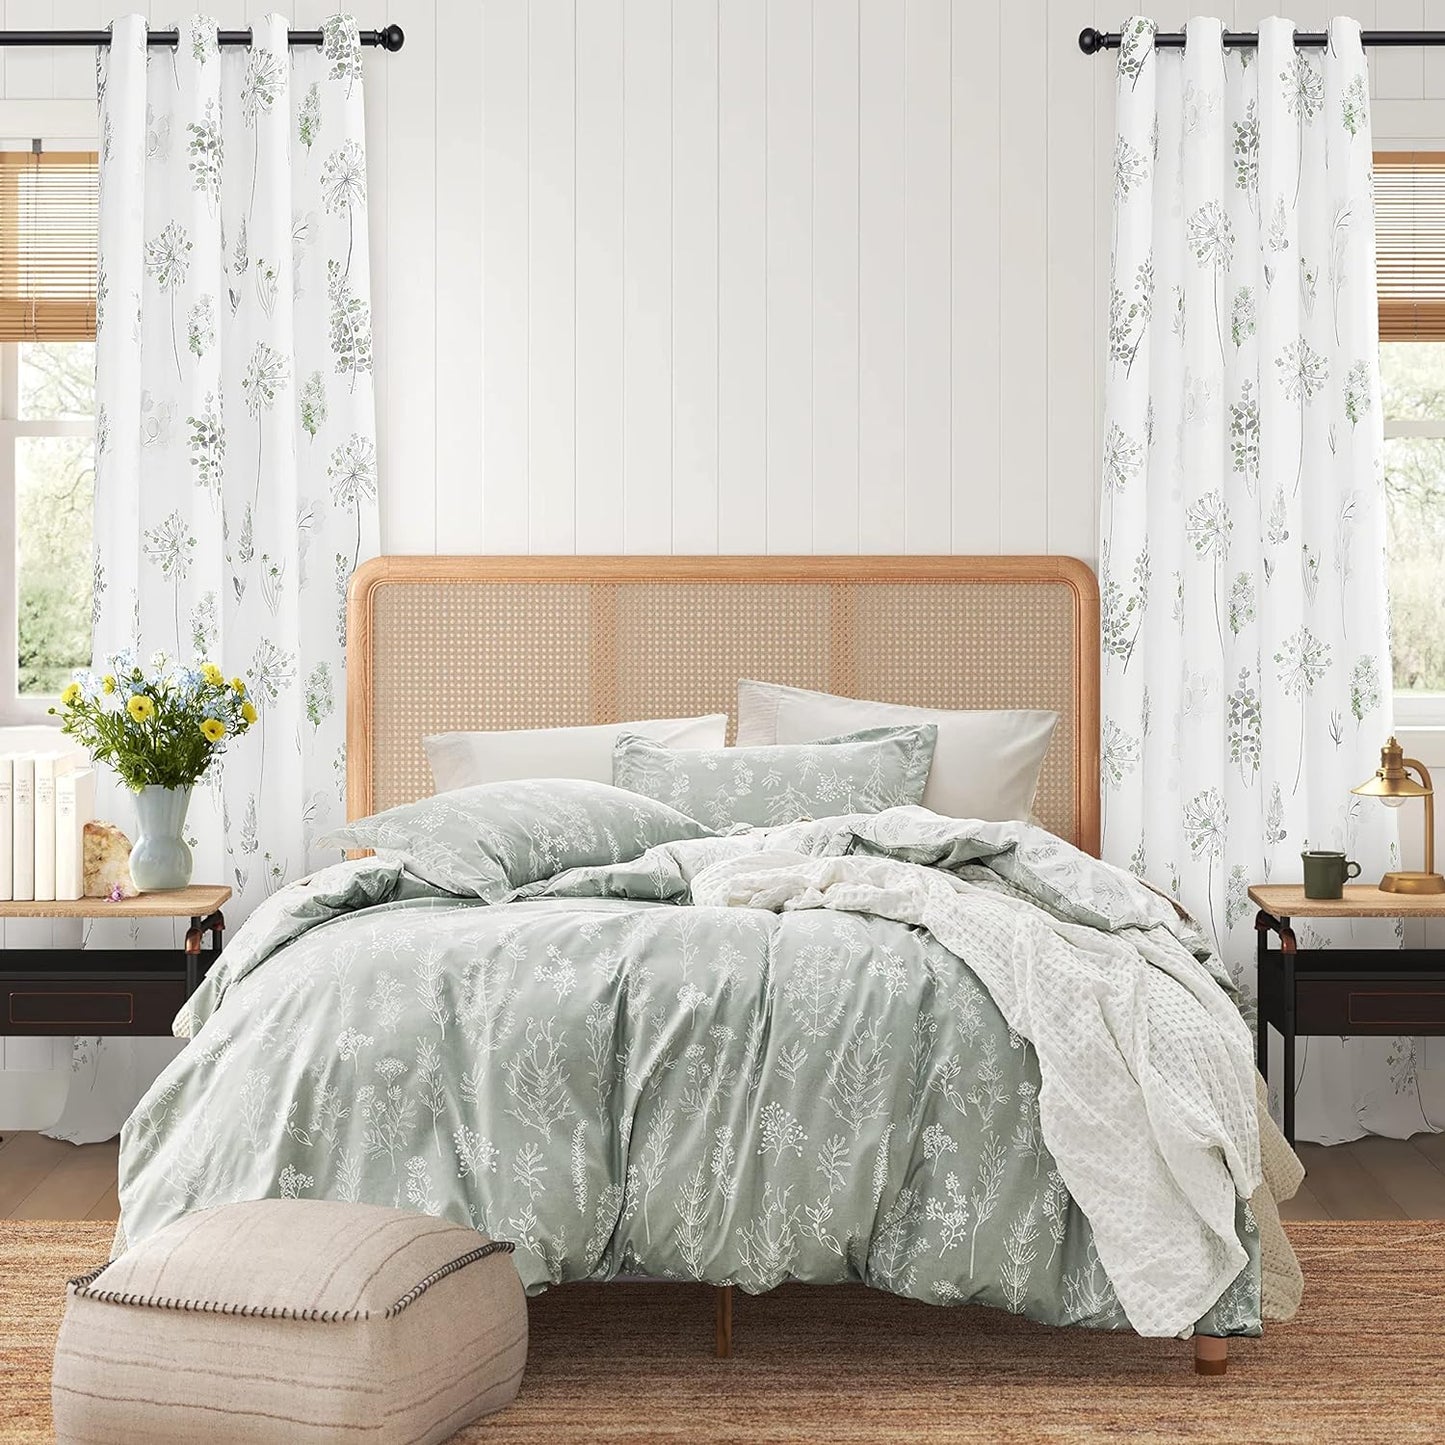 XTMYI 63 Inch Length Sage Green Window Curtains for Bedroom 2 Panels,Room Darkening Watercolor Floral Leaves 80% Blackout Flowered Printed Curtains for Living Room with Grommet,1 Pair Set  XTMYI   